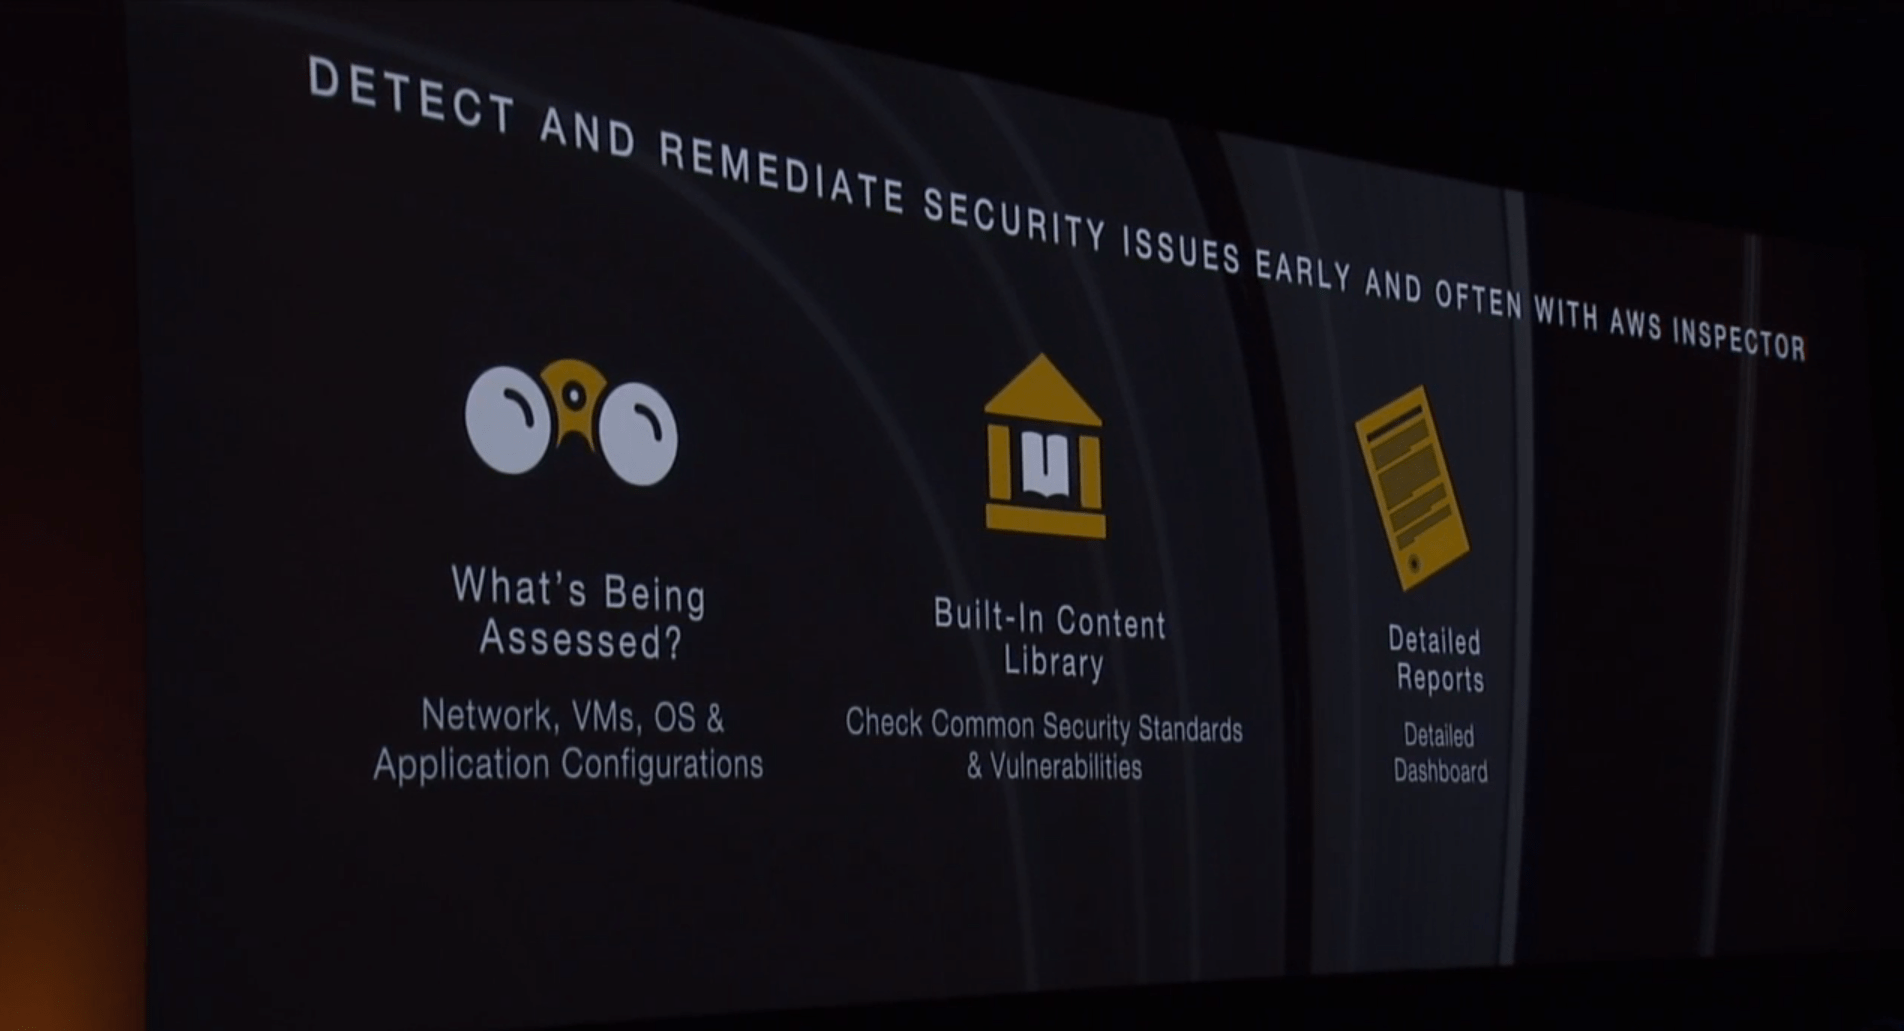 Amazon Web Services introduces the Amazon Inspector service in preview at the AWS re:Invent conference in Las Vegas on Oct. 7.